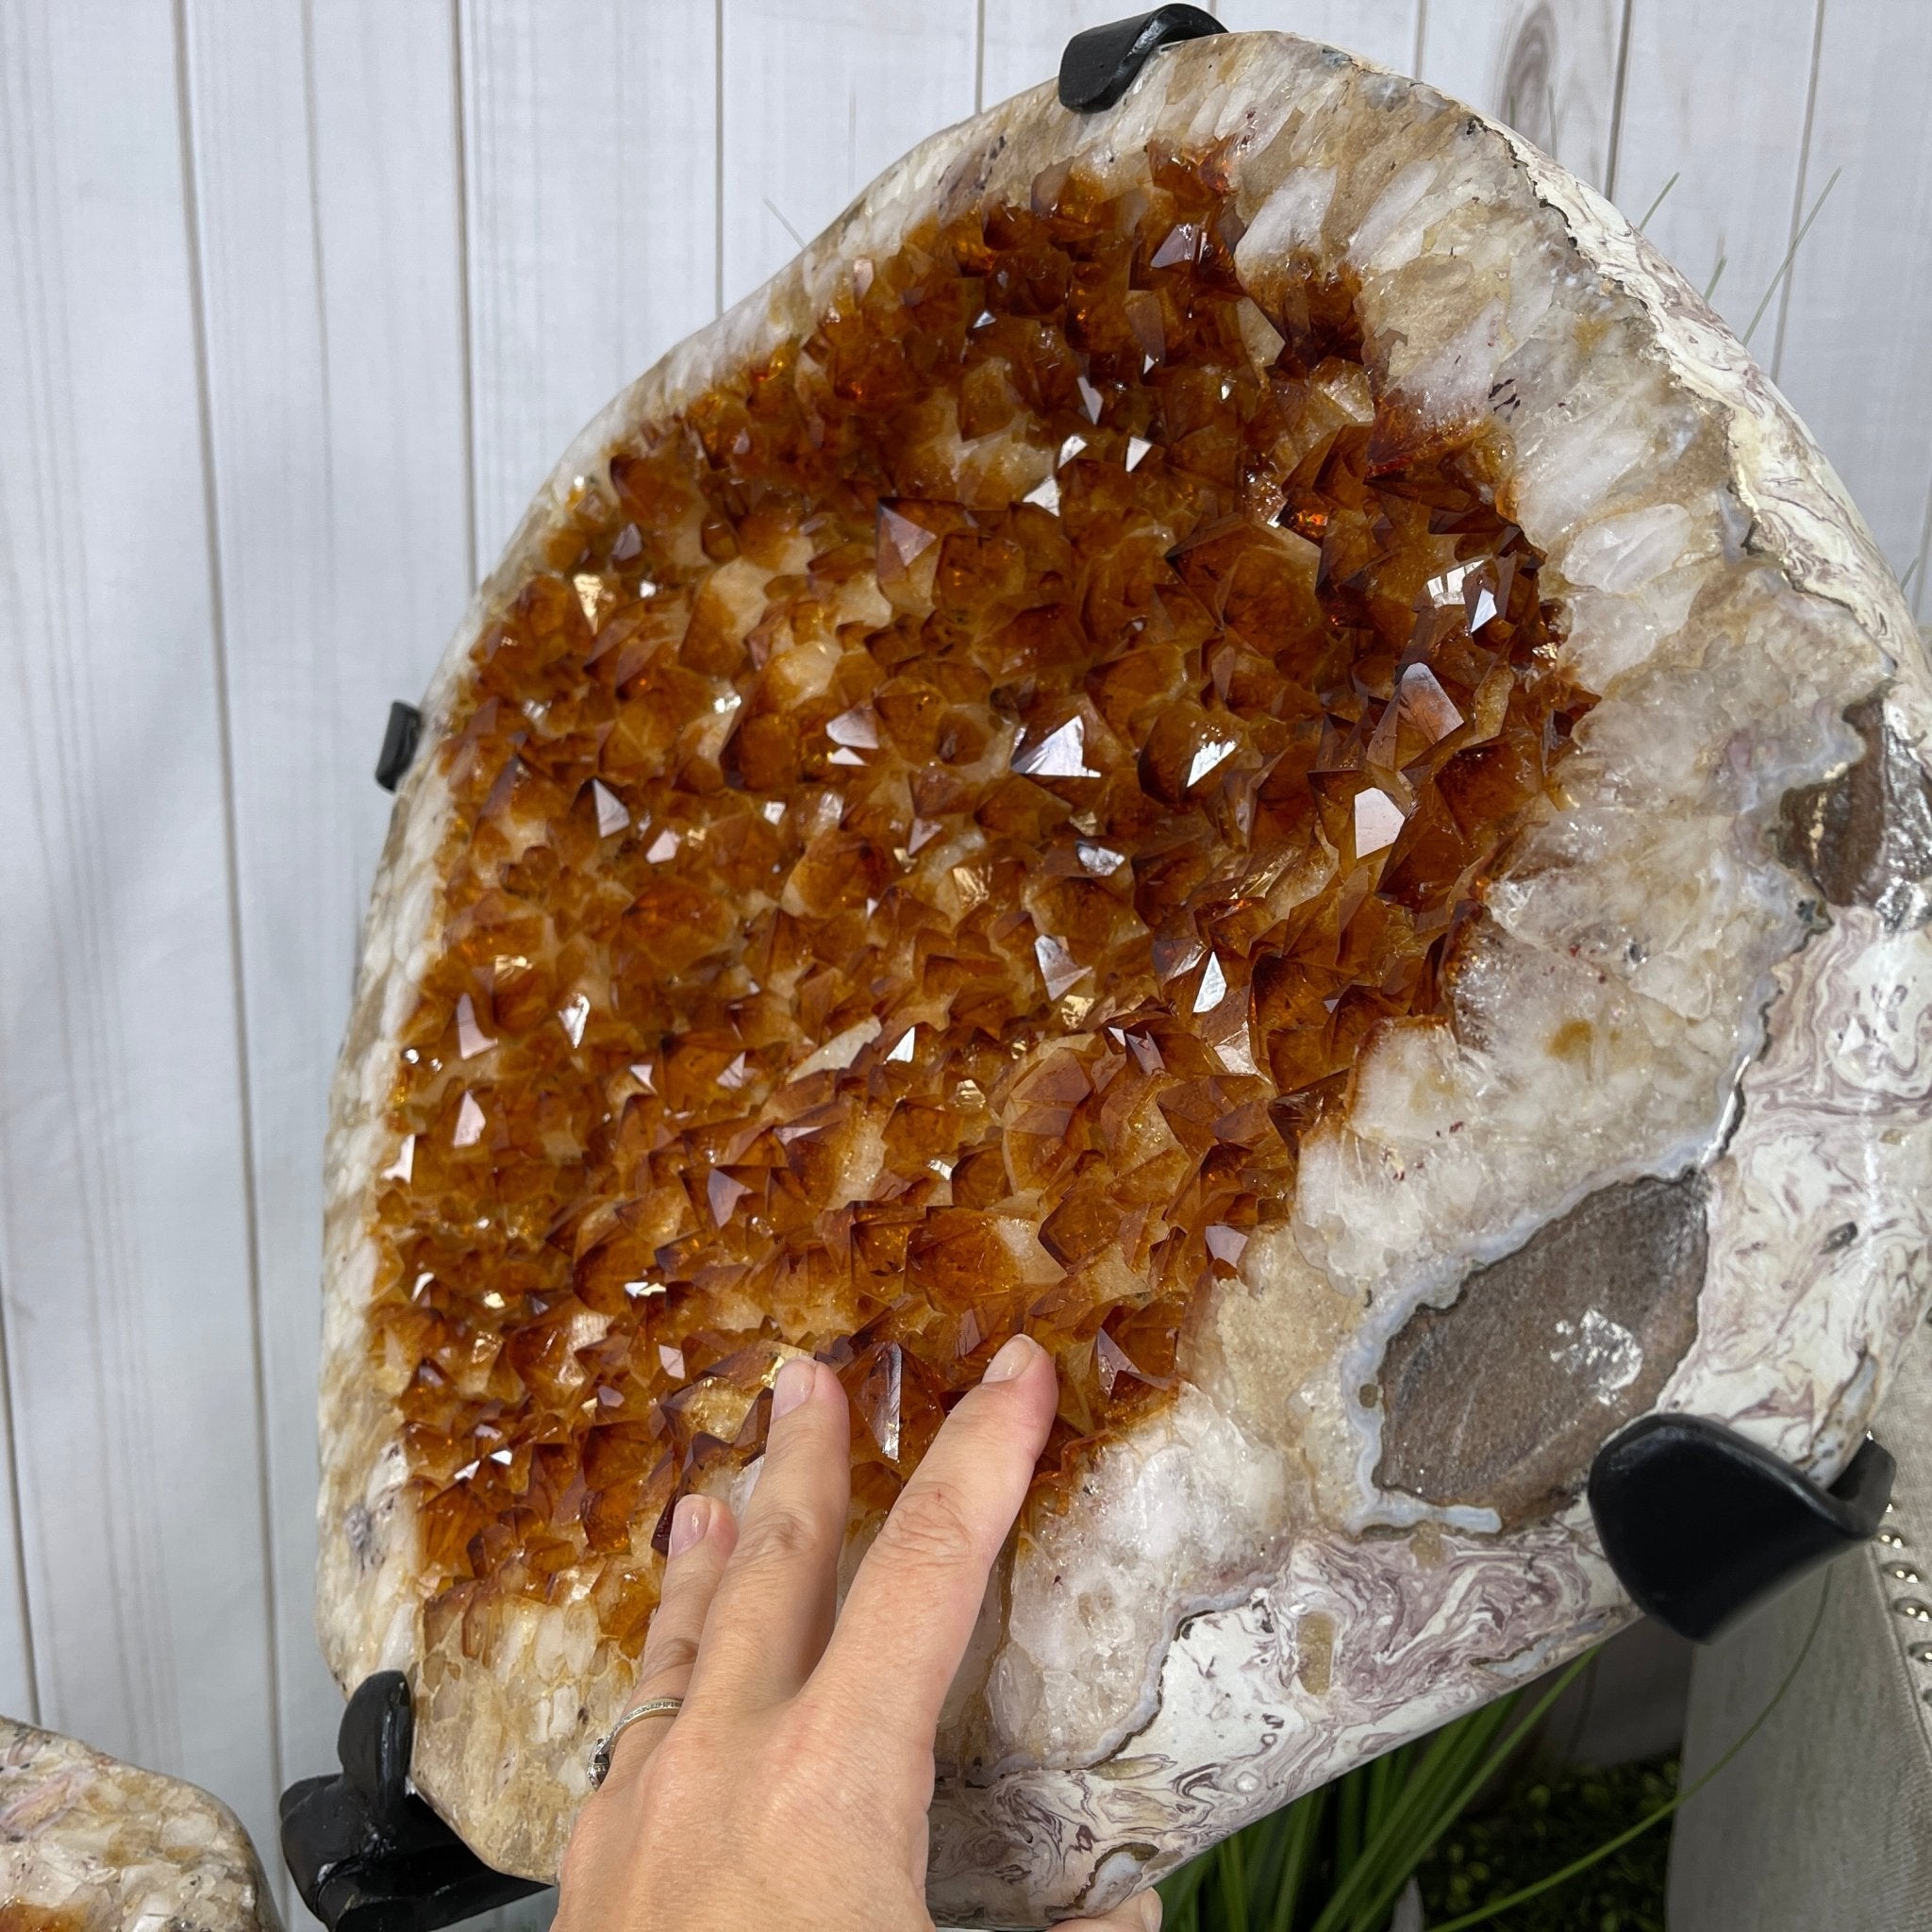 Large Super Quality Citrine "Jewelry Box" with Clam Shell Style Lid, 497 lbs & 28.25" tall Model #5858-0001 by Brazil Gems - Brazil GemsBrazil GemsLarge Super Quality Citrine "Jewelry Box" with Clam Shell Style Lid, 497 lbs & 28.25" tall Model #5858-0001 by Brazil GemsGeode Jewelry Boxes5858-0001